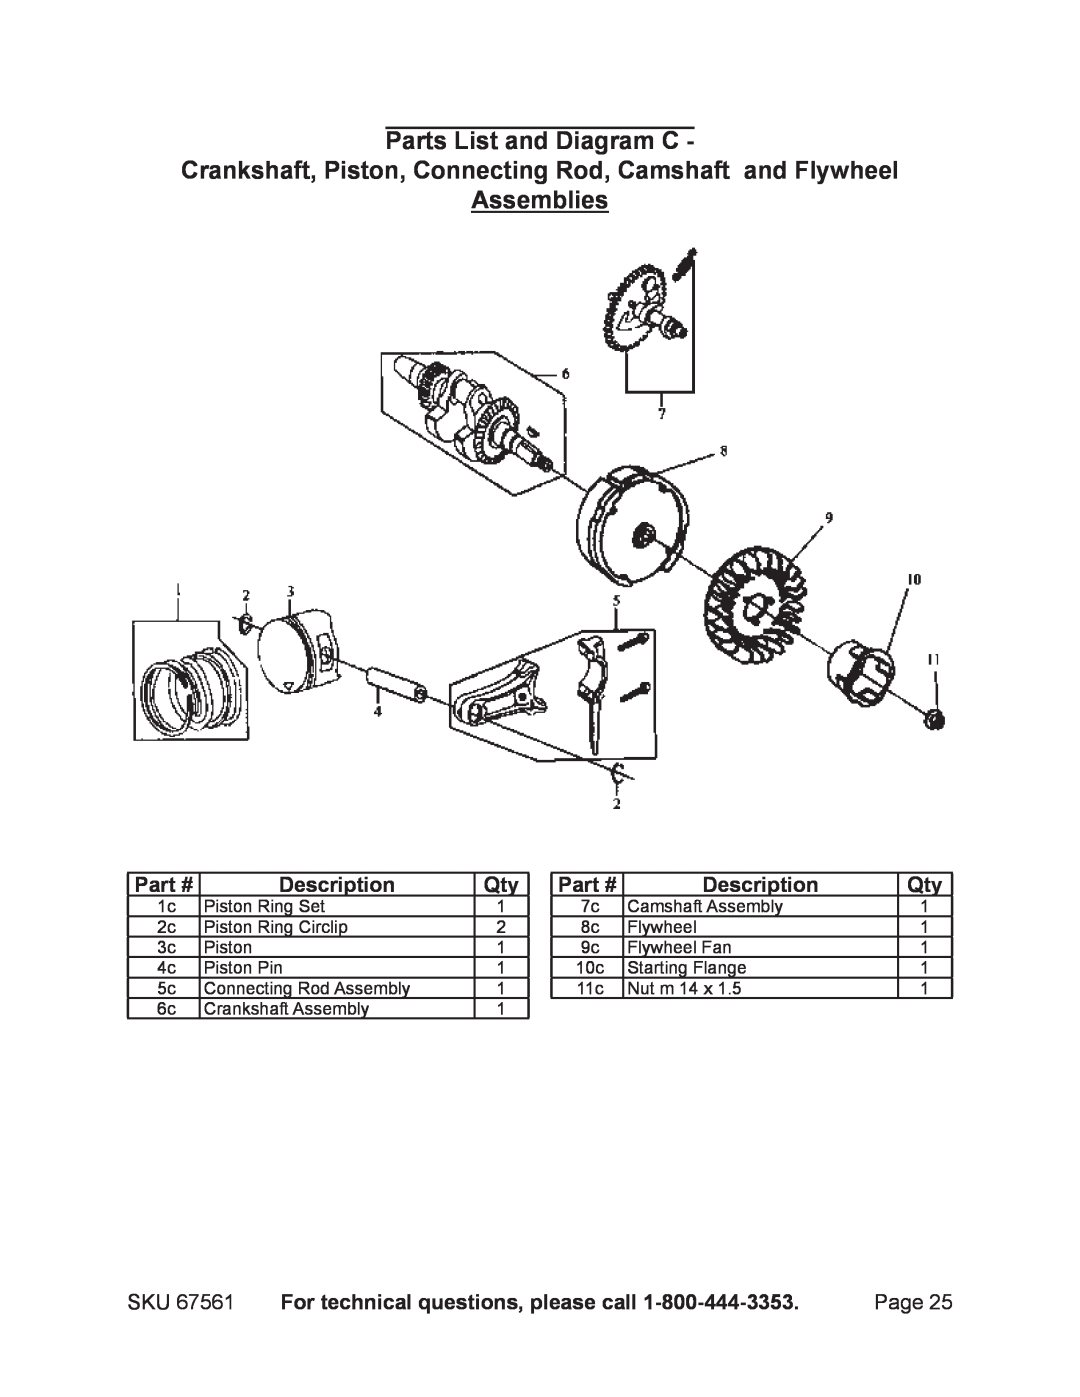 Chicago Electric 67561 Parts List and Diagram C, Crankshaft, Piston, Connecting Rod, Camshaft and Flywheel Assemblies 